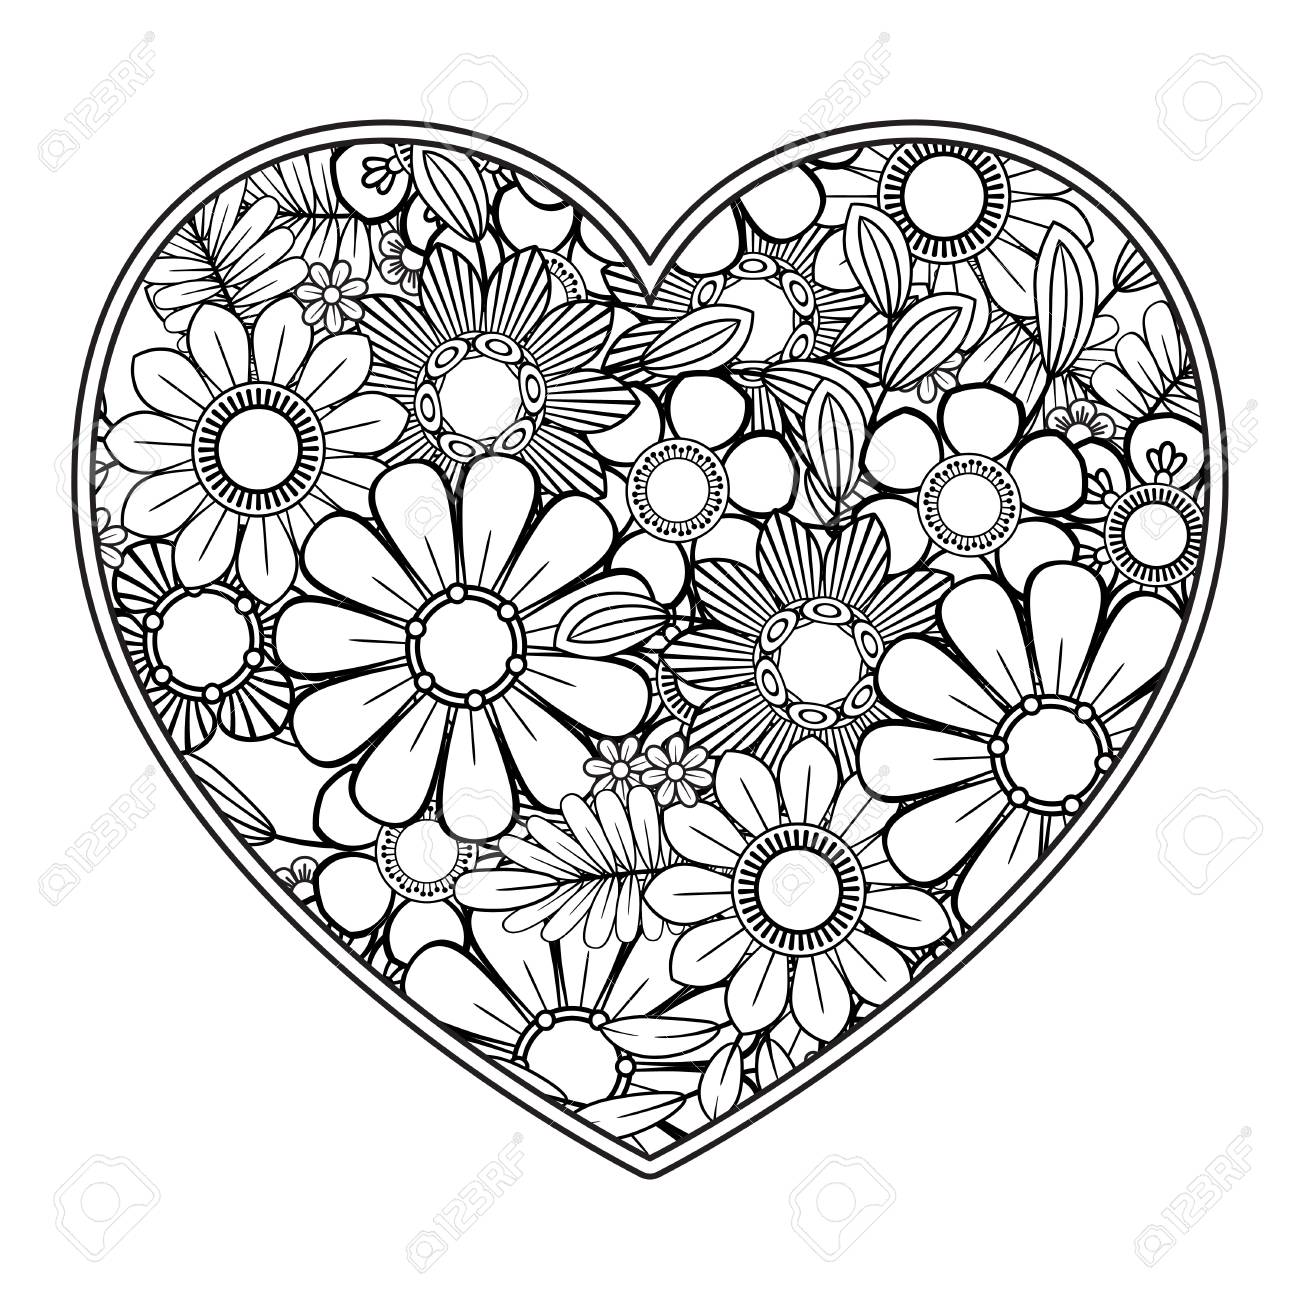 Heart with floral pattern valentines day adult coloring page vector illustration isolated on white background royalty free svg cliparts vectors and stock illustration image